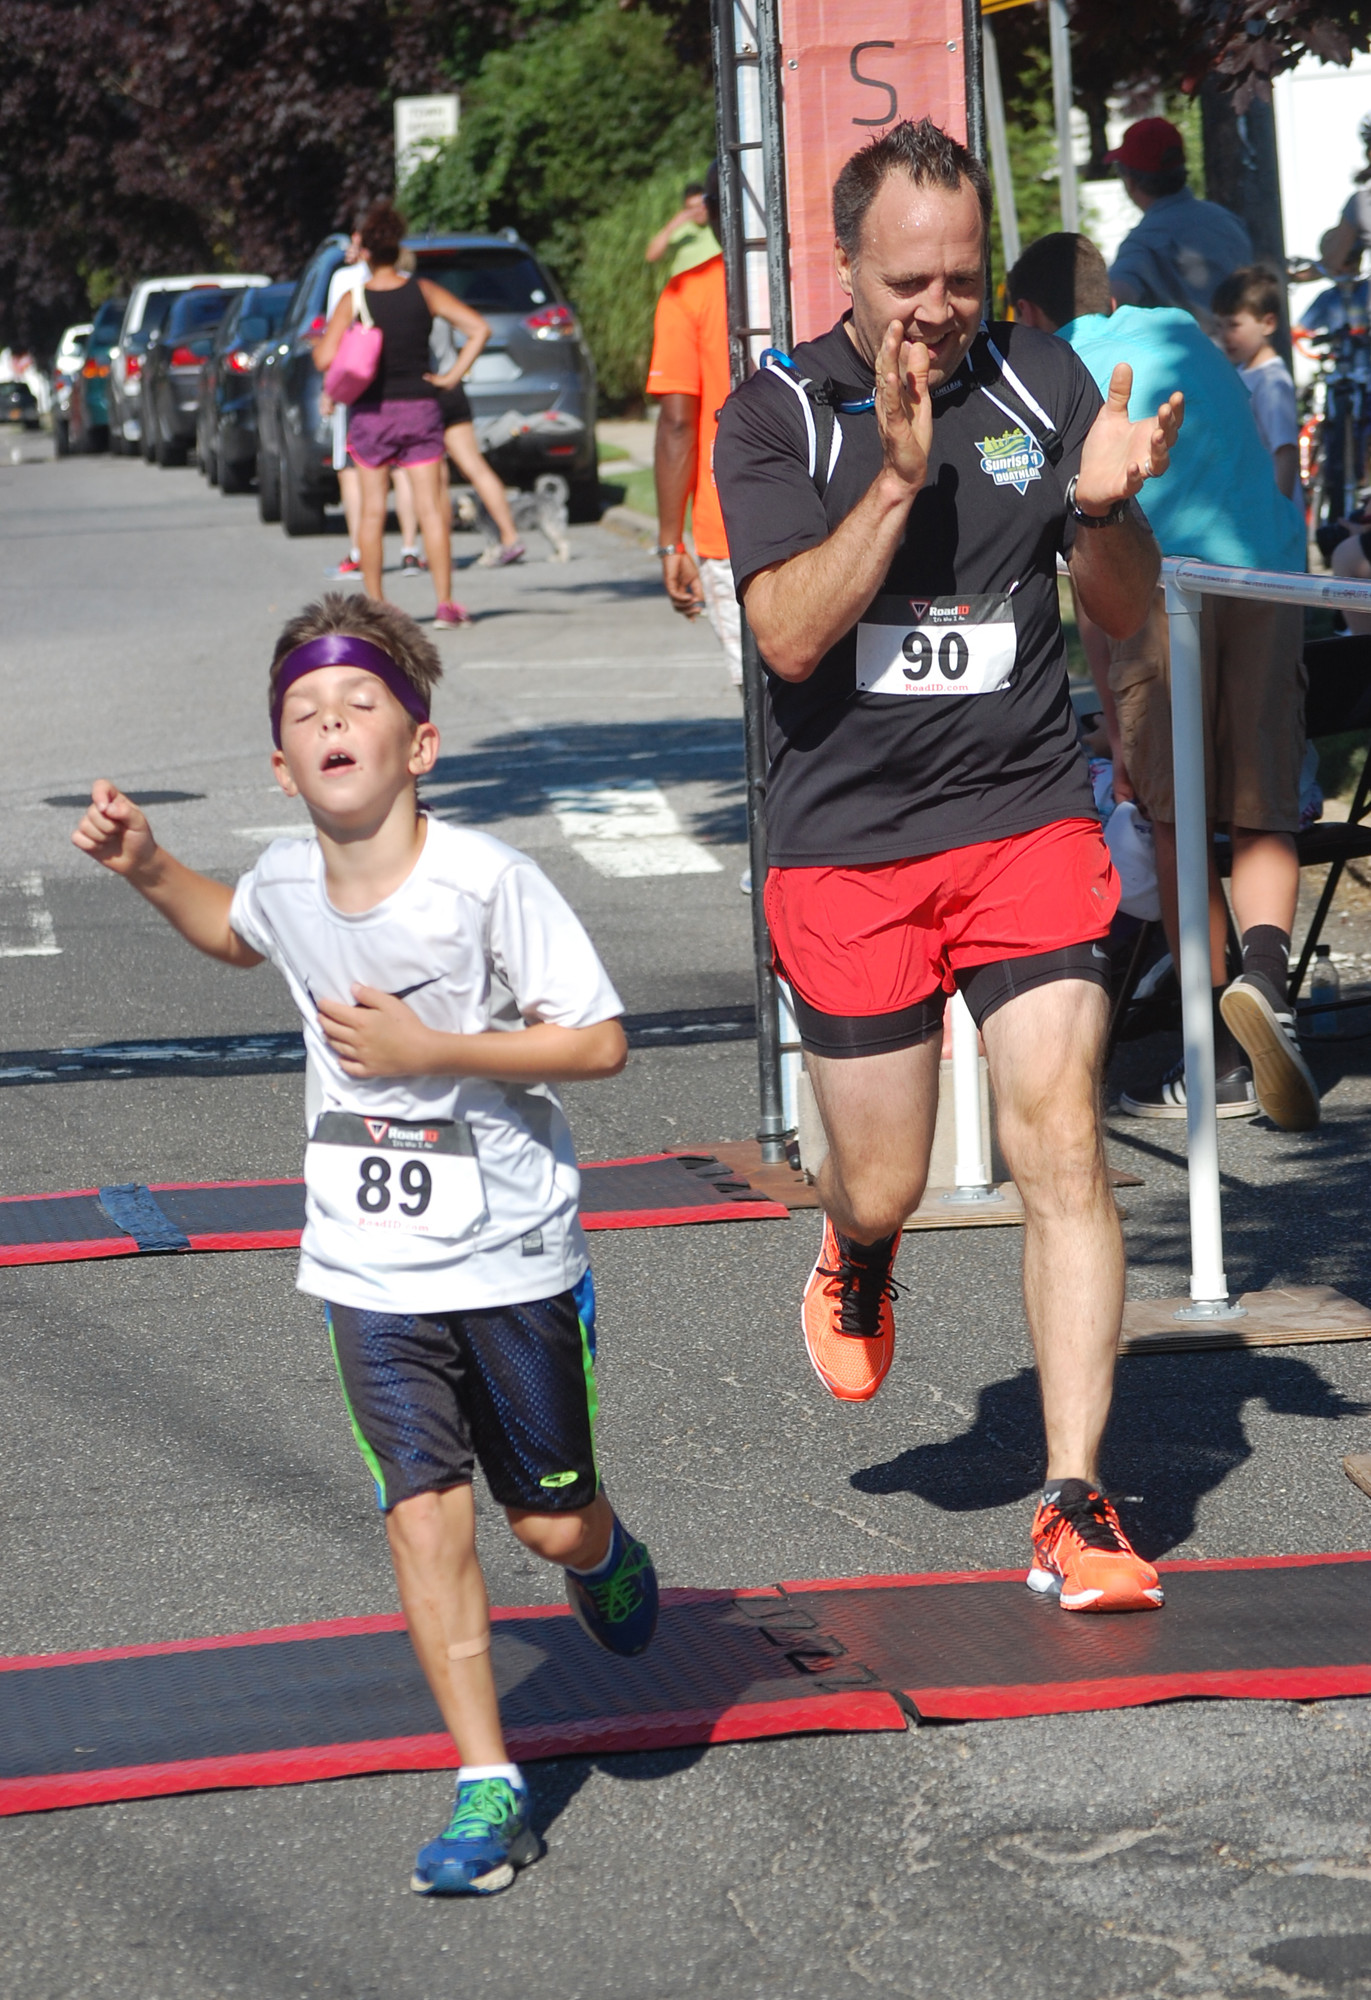 Noah Geyer, 9, and his father, Troy, of Wantagh, crossed the finish line together.